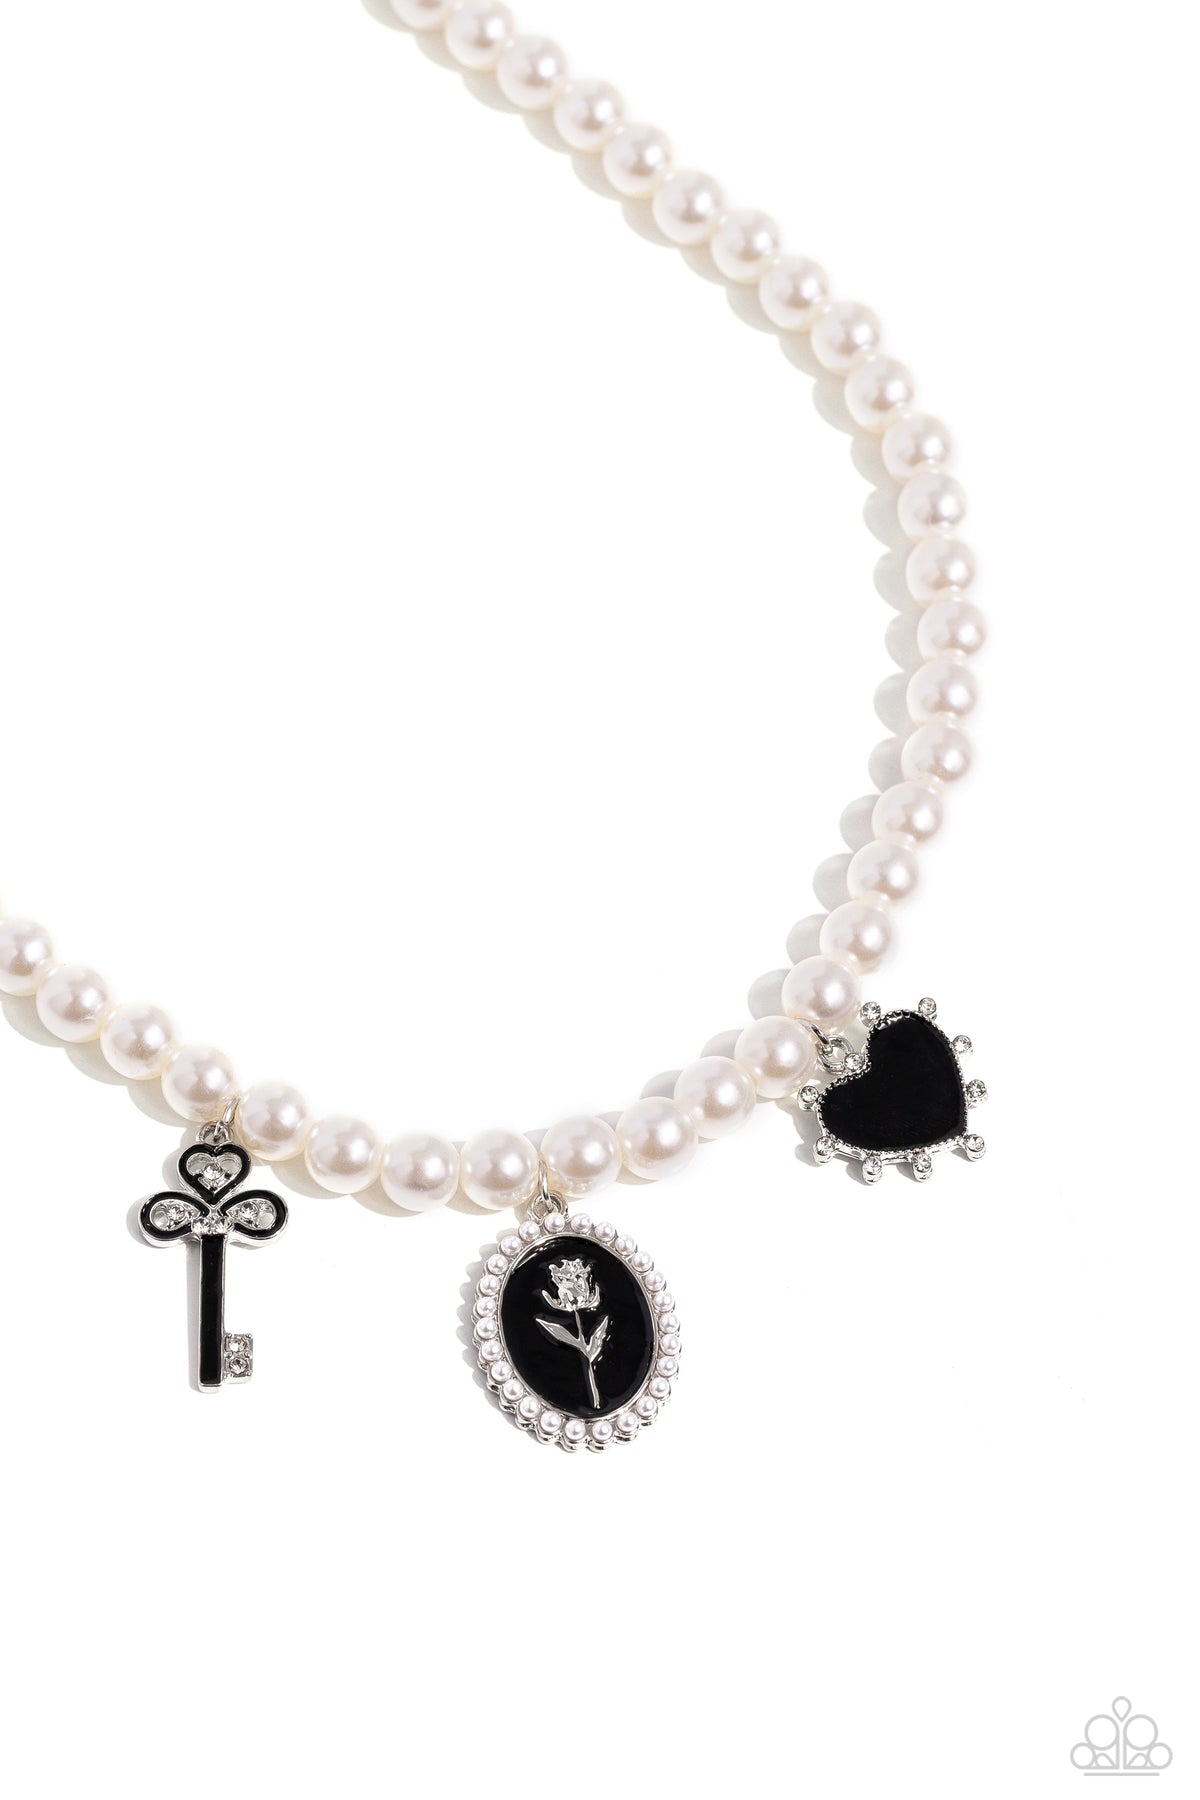 Charming Collision Black Charm &amp; White Pearl Necklace - Paparazzi Accessories- lightbox - CarasShop.com - $5 Jewelry by Cara Jewels